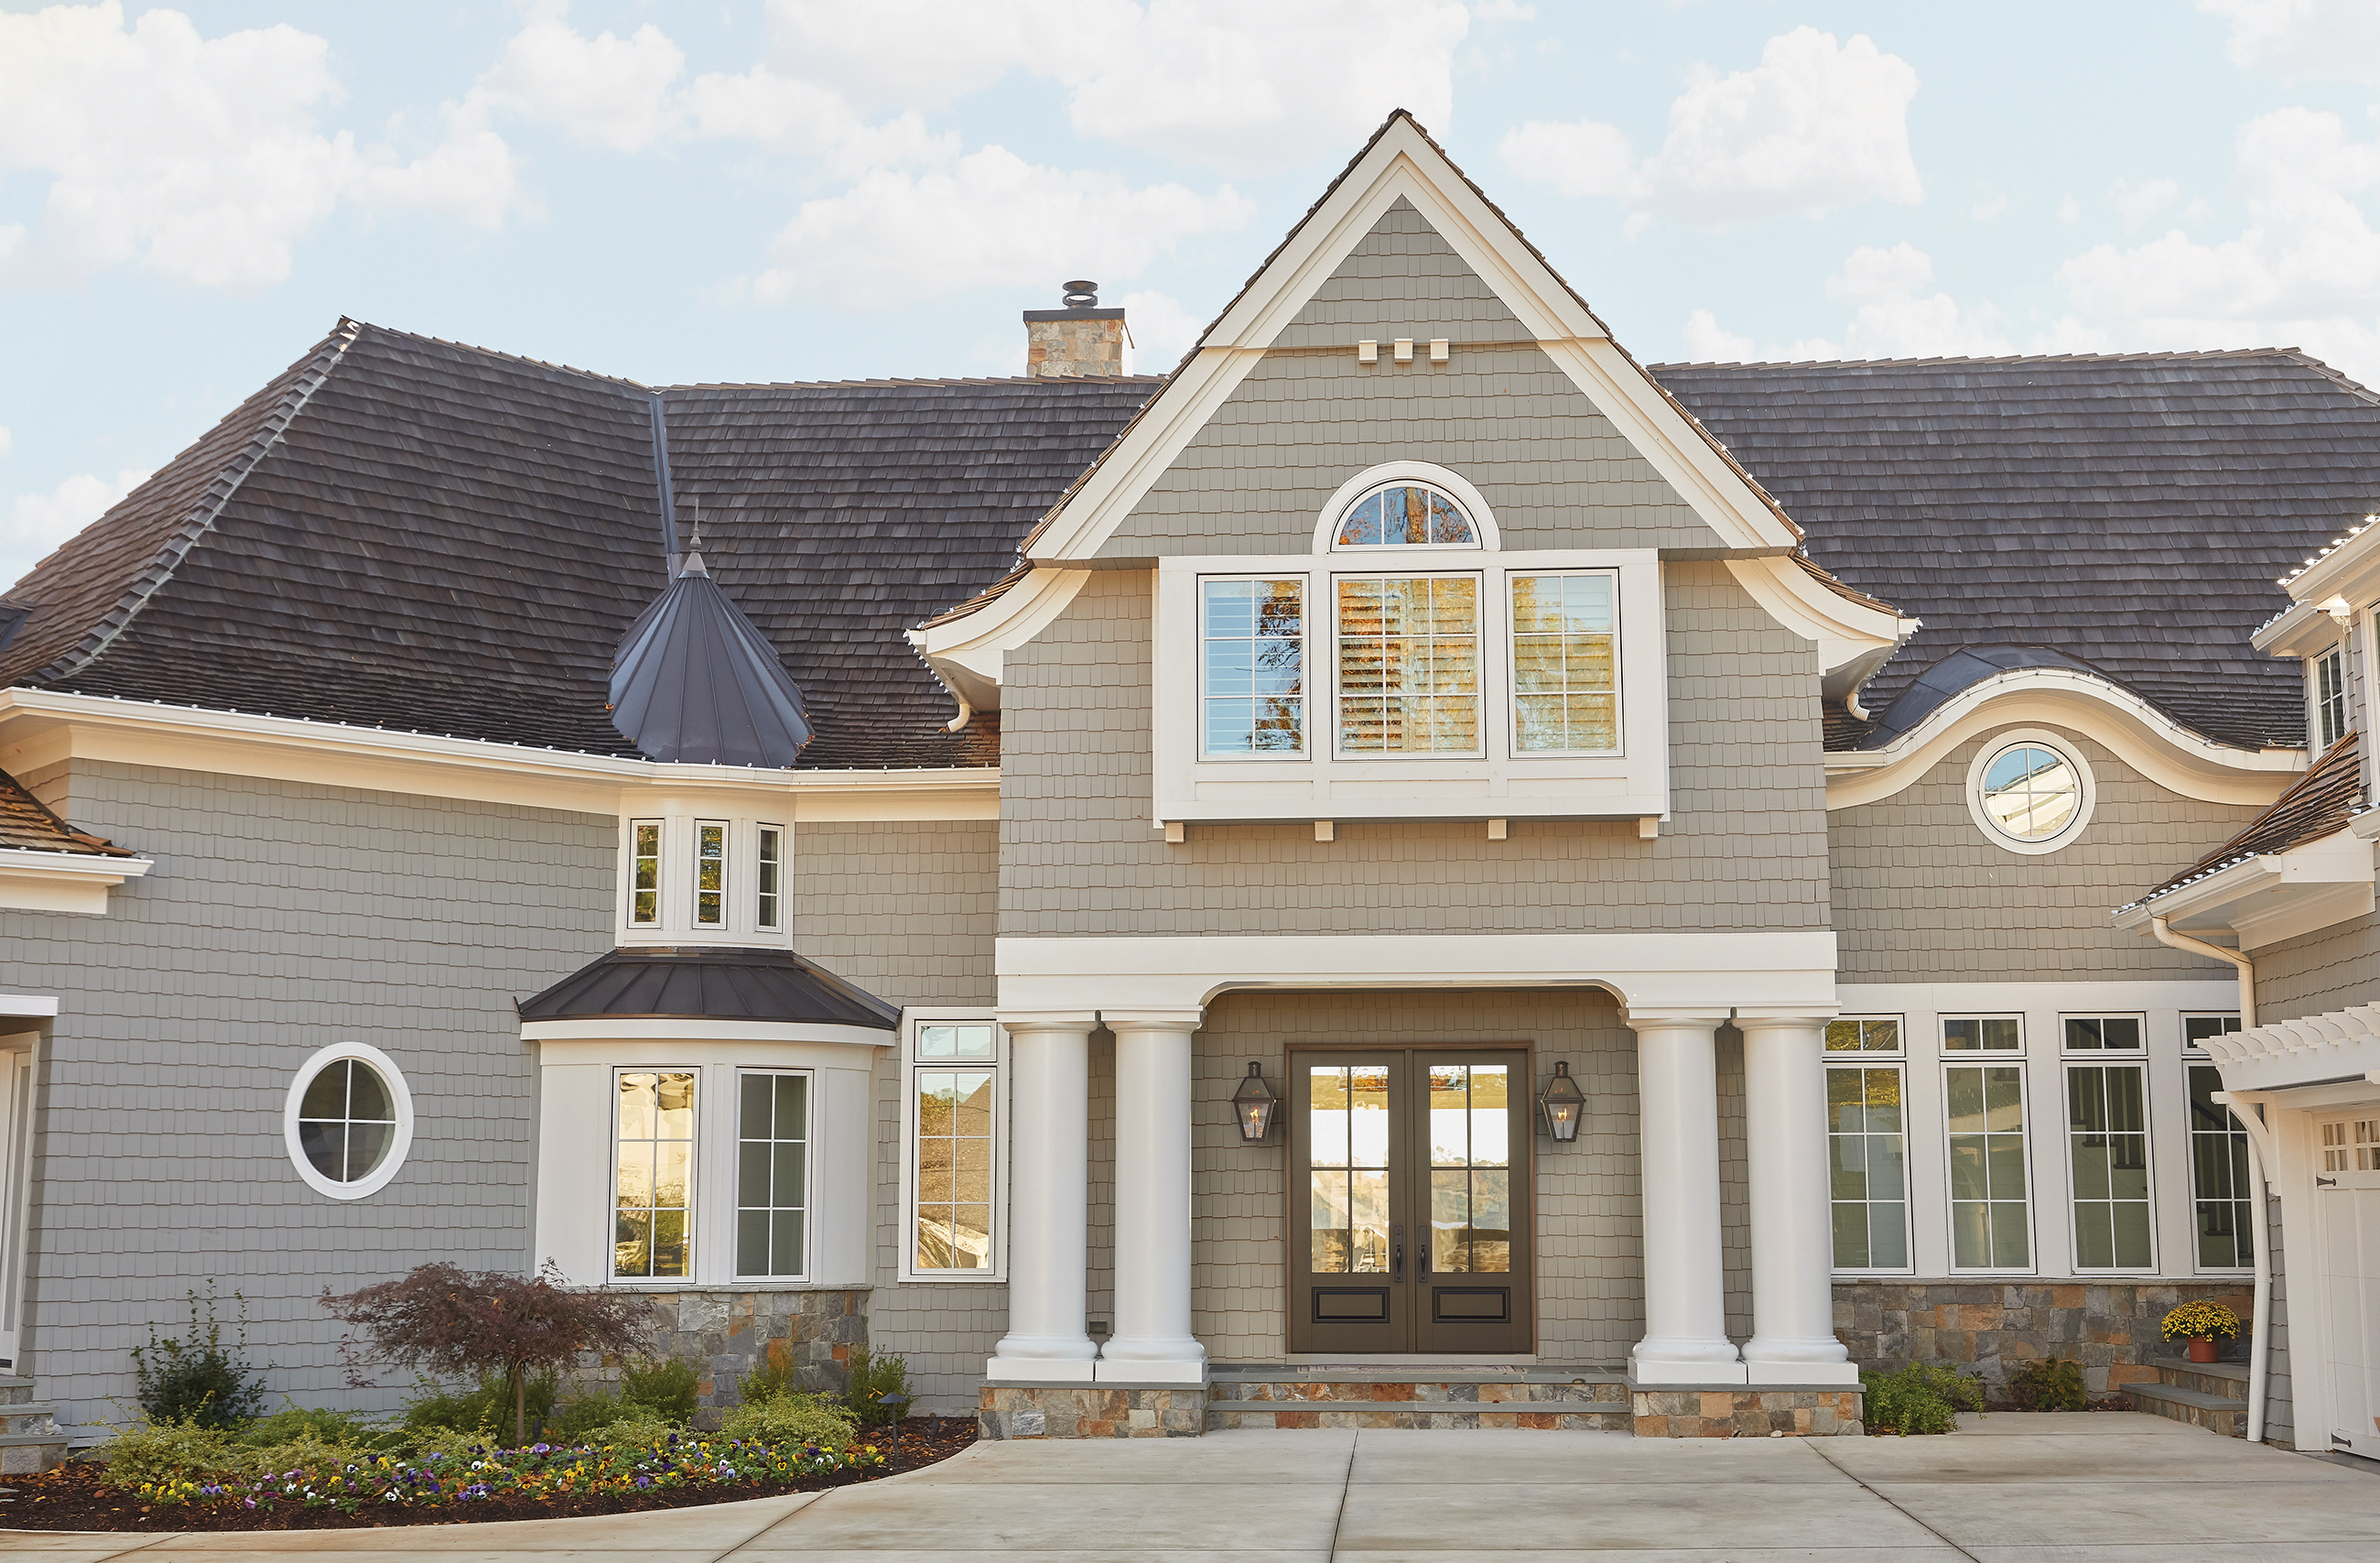 JELD-WEN fiberglass and steel doors combine energy-efficient durability with aesthetic appeal – key homeowner priorities, according to a new survey.